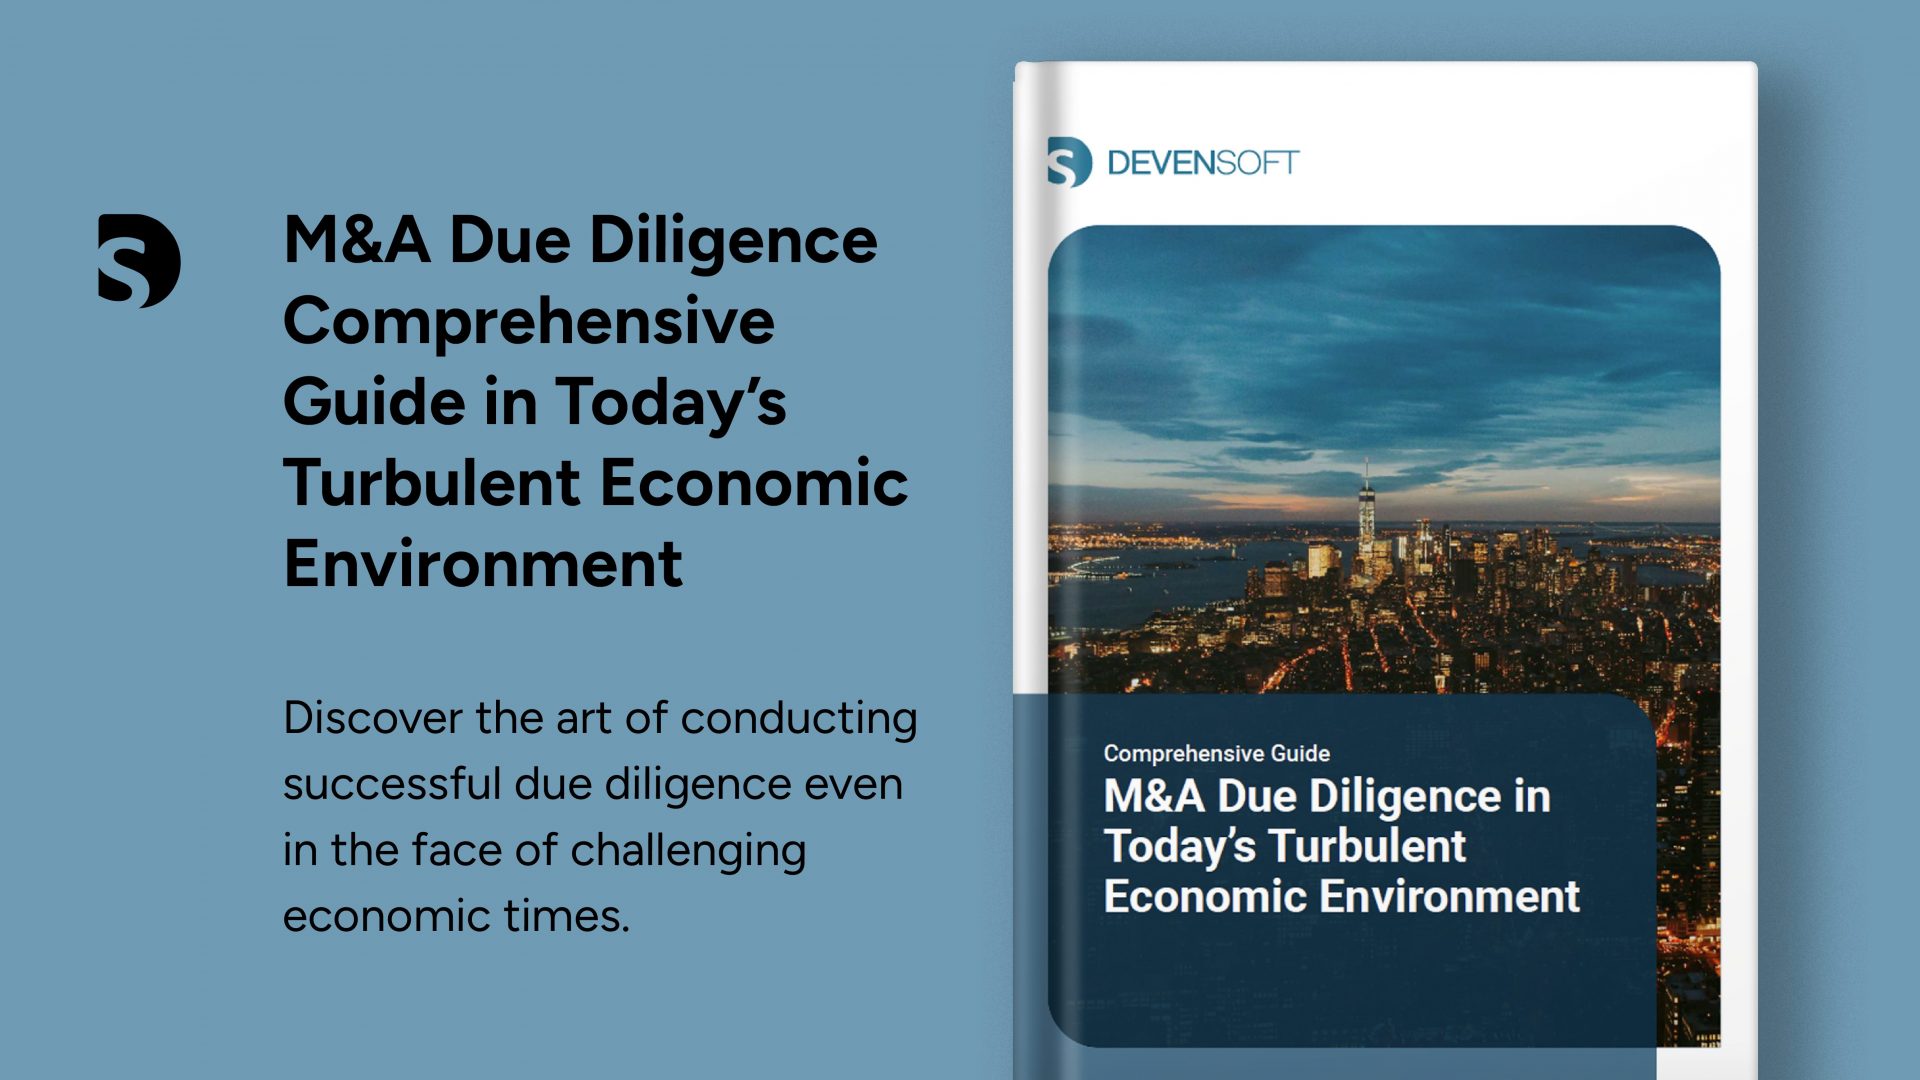 Comprehensive Guide to M&A Due Diligence in Today’s Turbulent Economic Environment